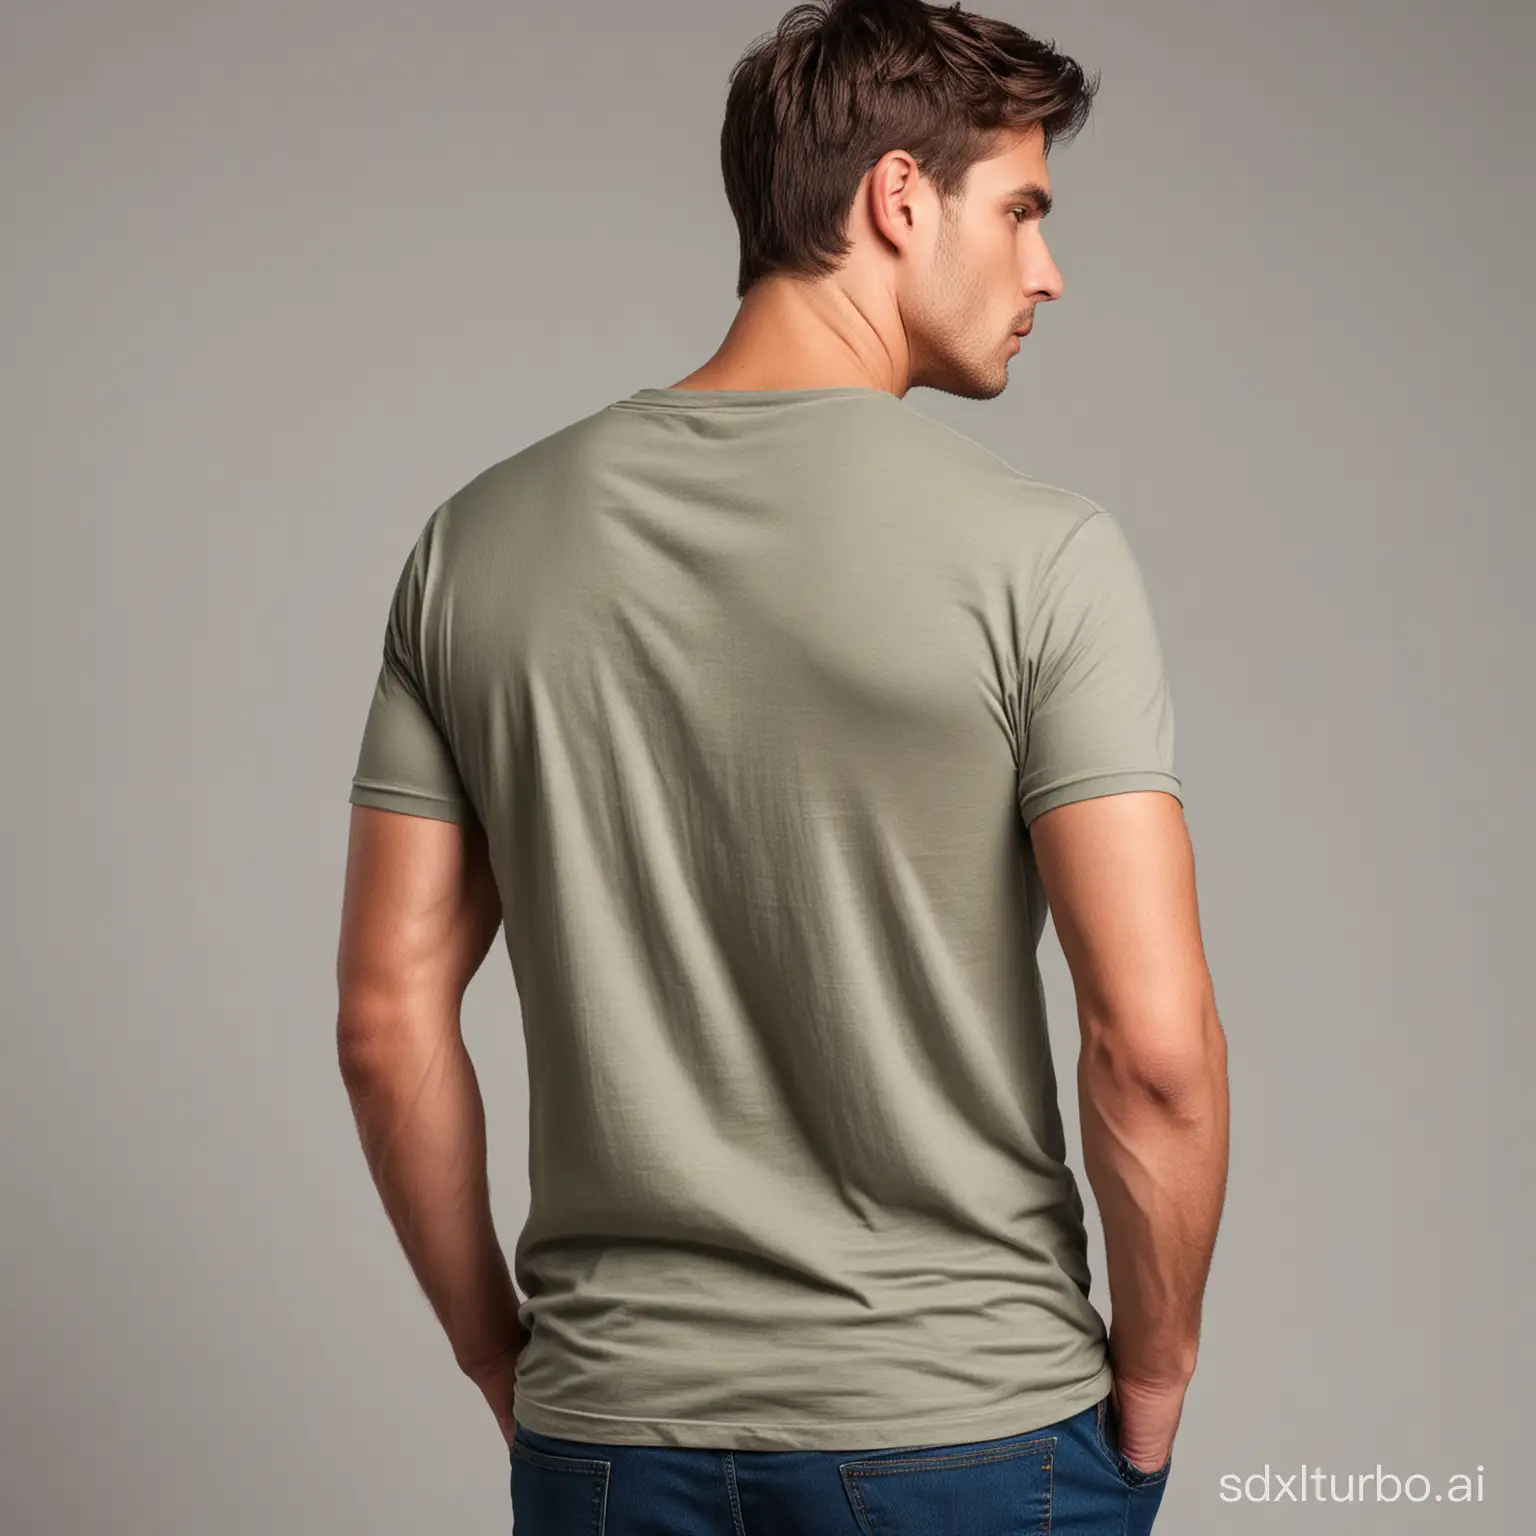 Casually-Dressed-Male-Model-Back-View-in-Plain-TShirt